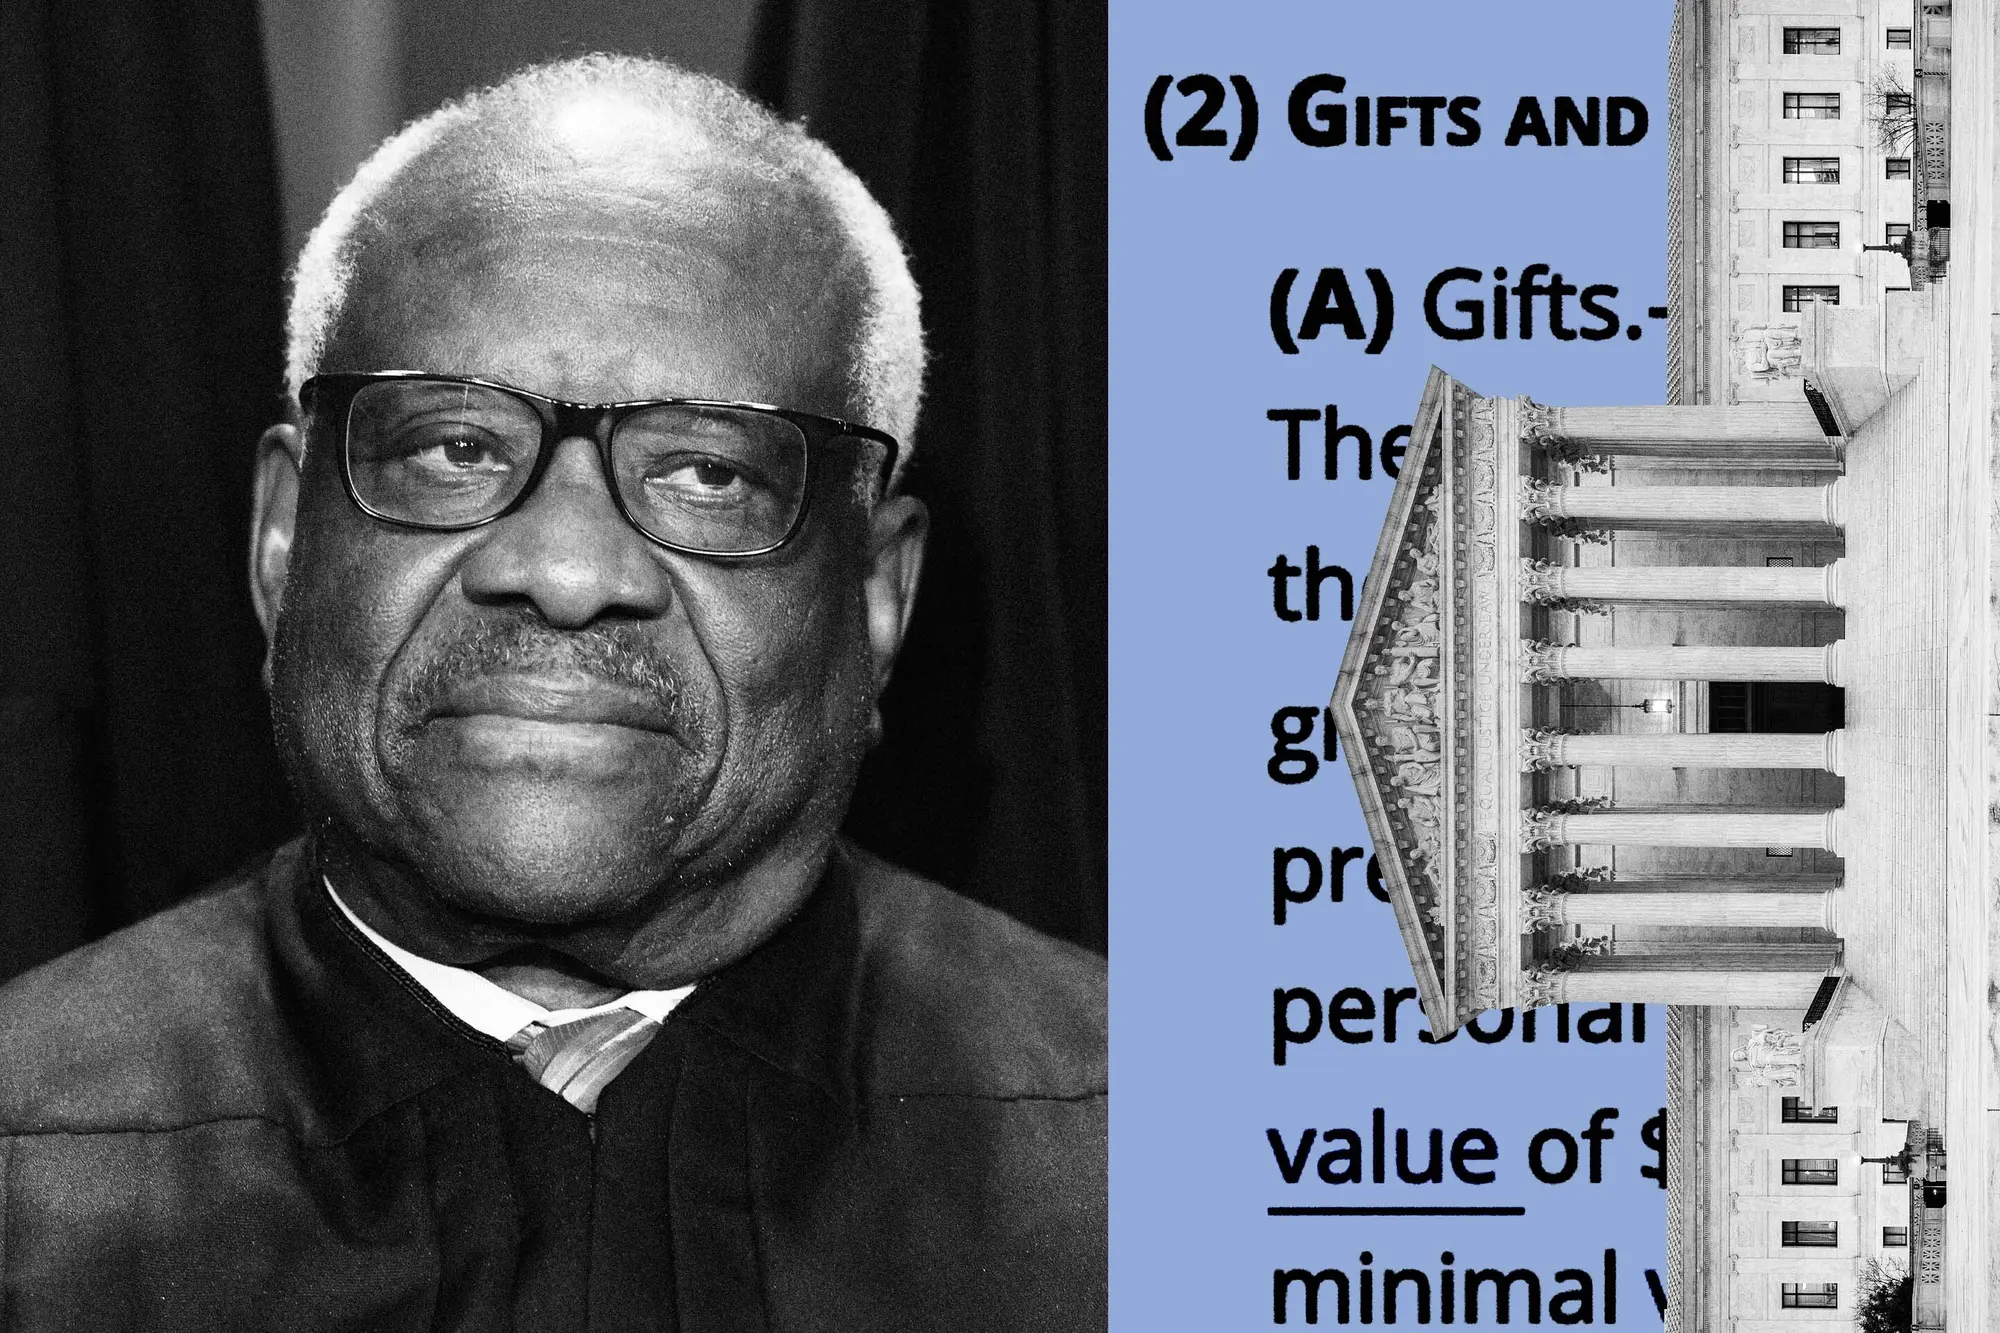 Gifts and Grifts? It’s Not Personal: Why Clarence Thomas’ Trip to the Koch Summit Undermines His Ethics Defense (propublica.org)